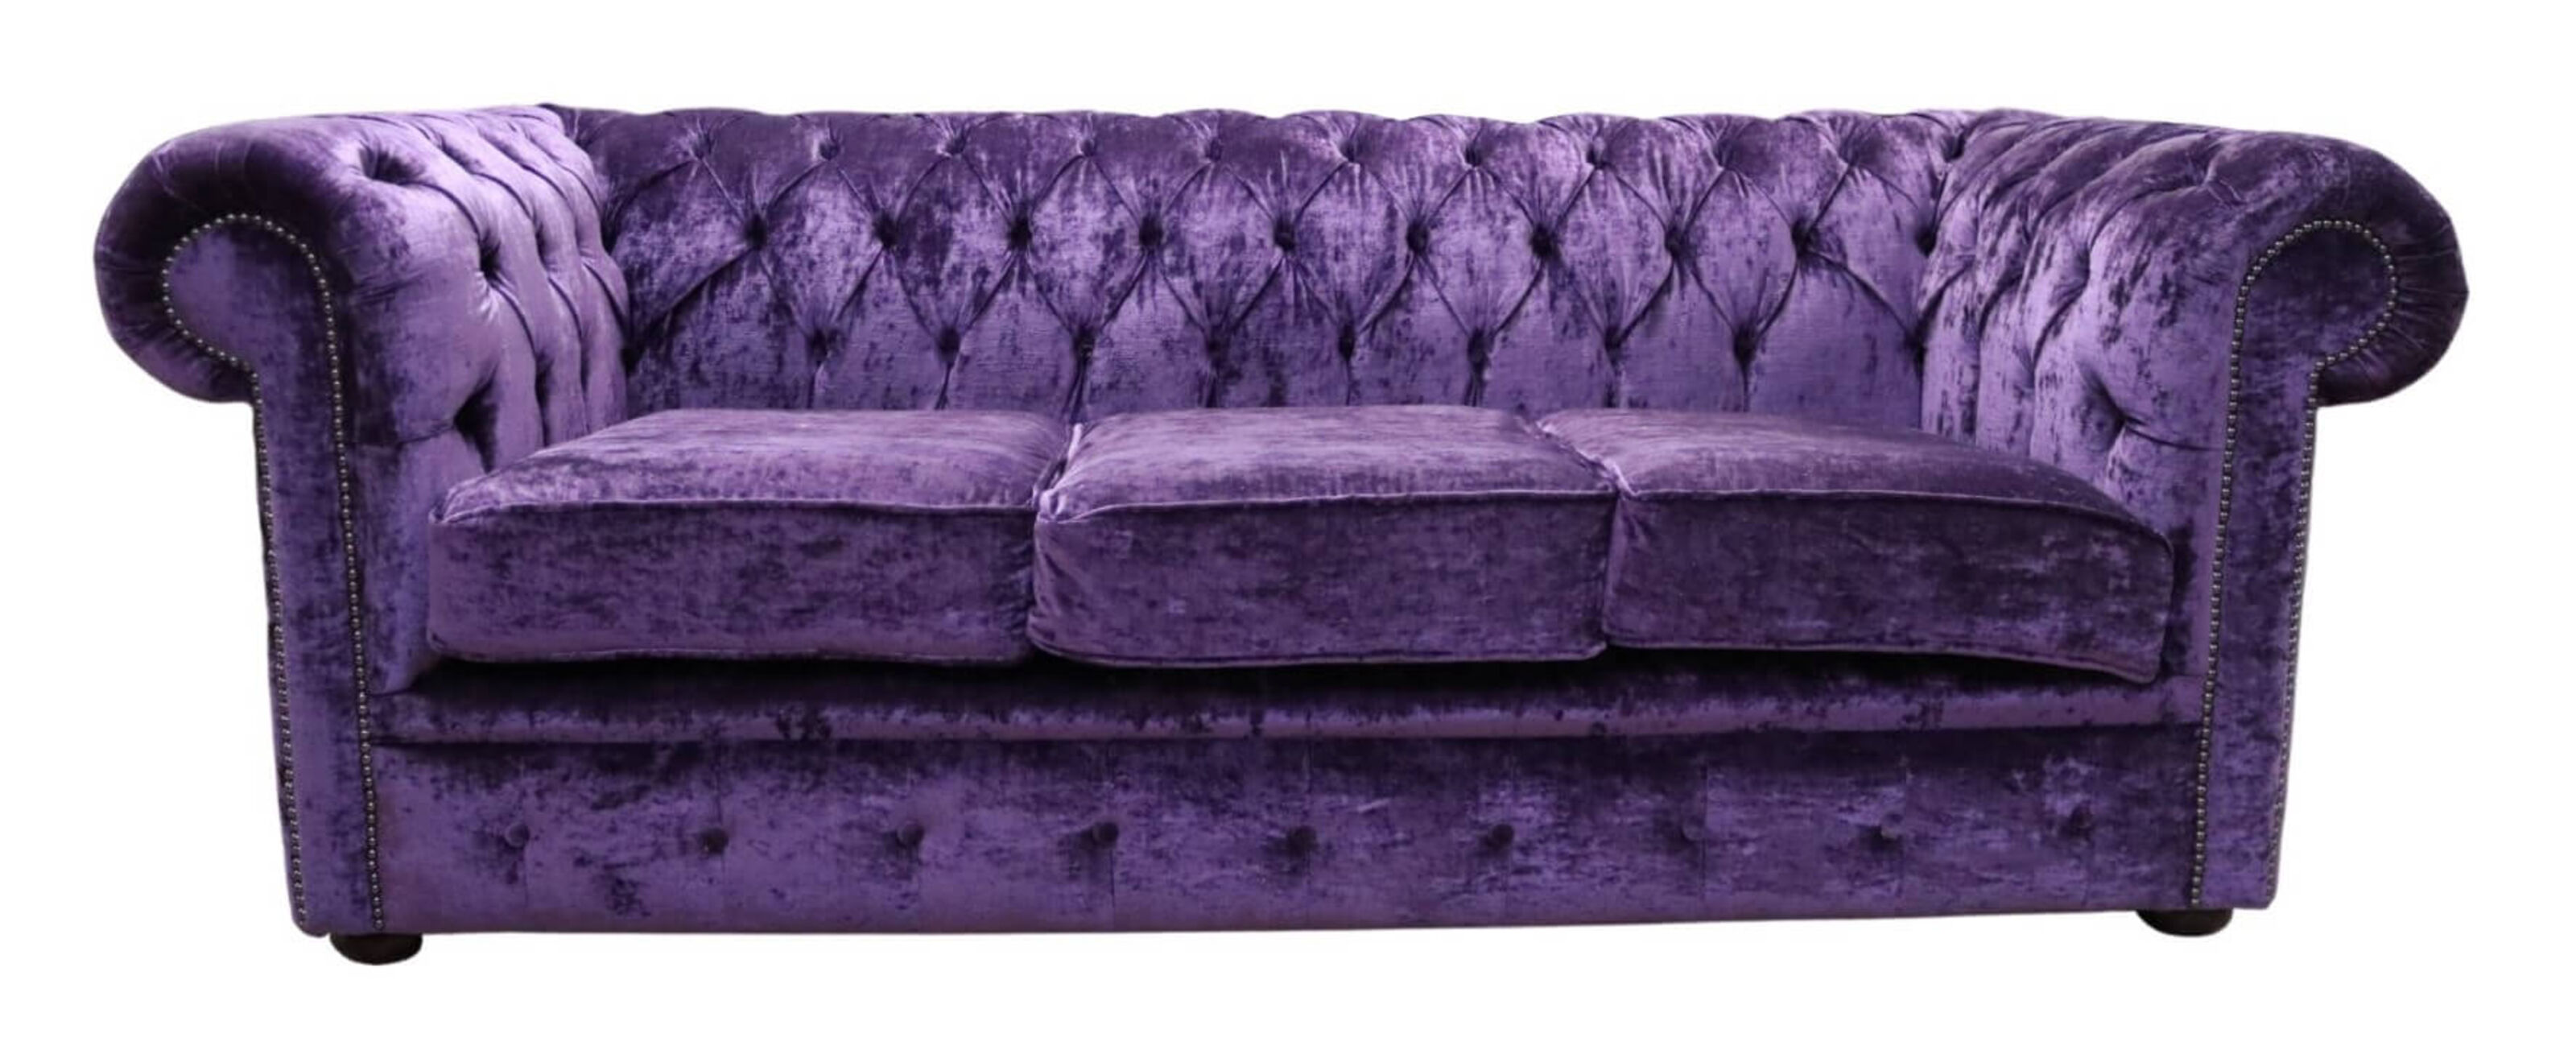 Textile Tradition Exploring Fabric Options for Chesterfield Sofas  %Post Title